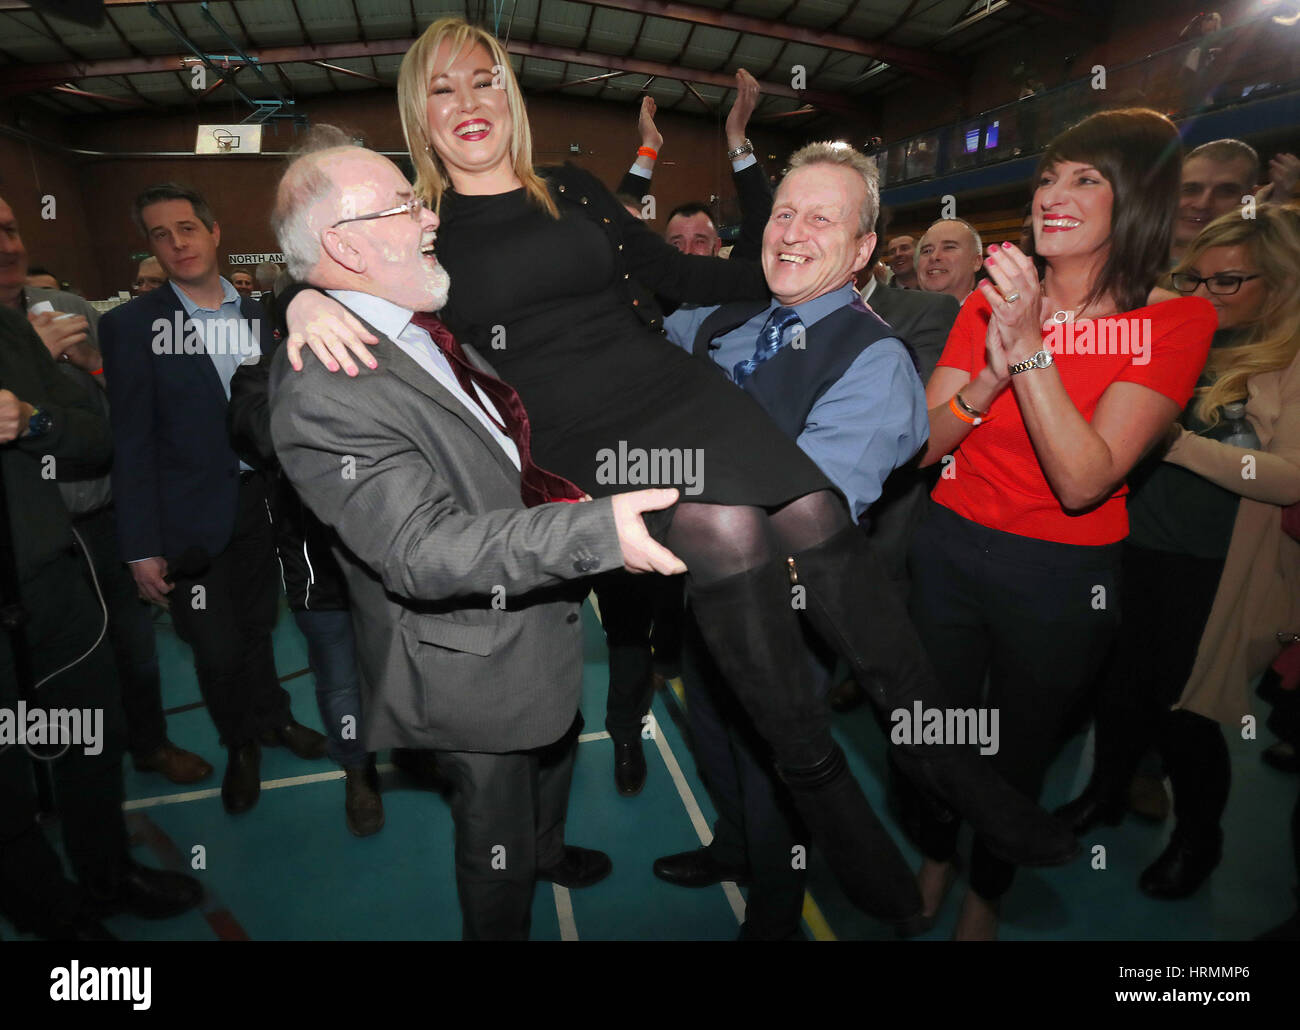 Michelle O'Neill, leader of Sinn Fein in Northern Ireland, celebrates winning her seat at the Seven Towers Leisure Centre, Ballymena, in Northern Ireland's Assembly election. Stock Photo